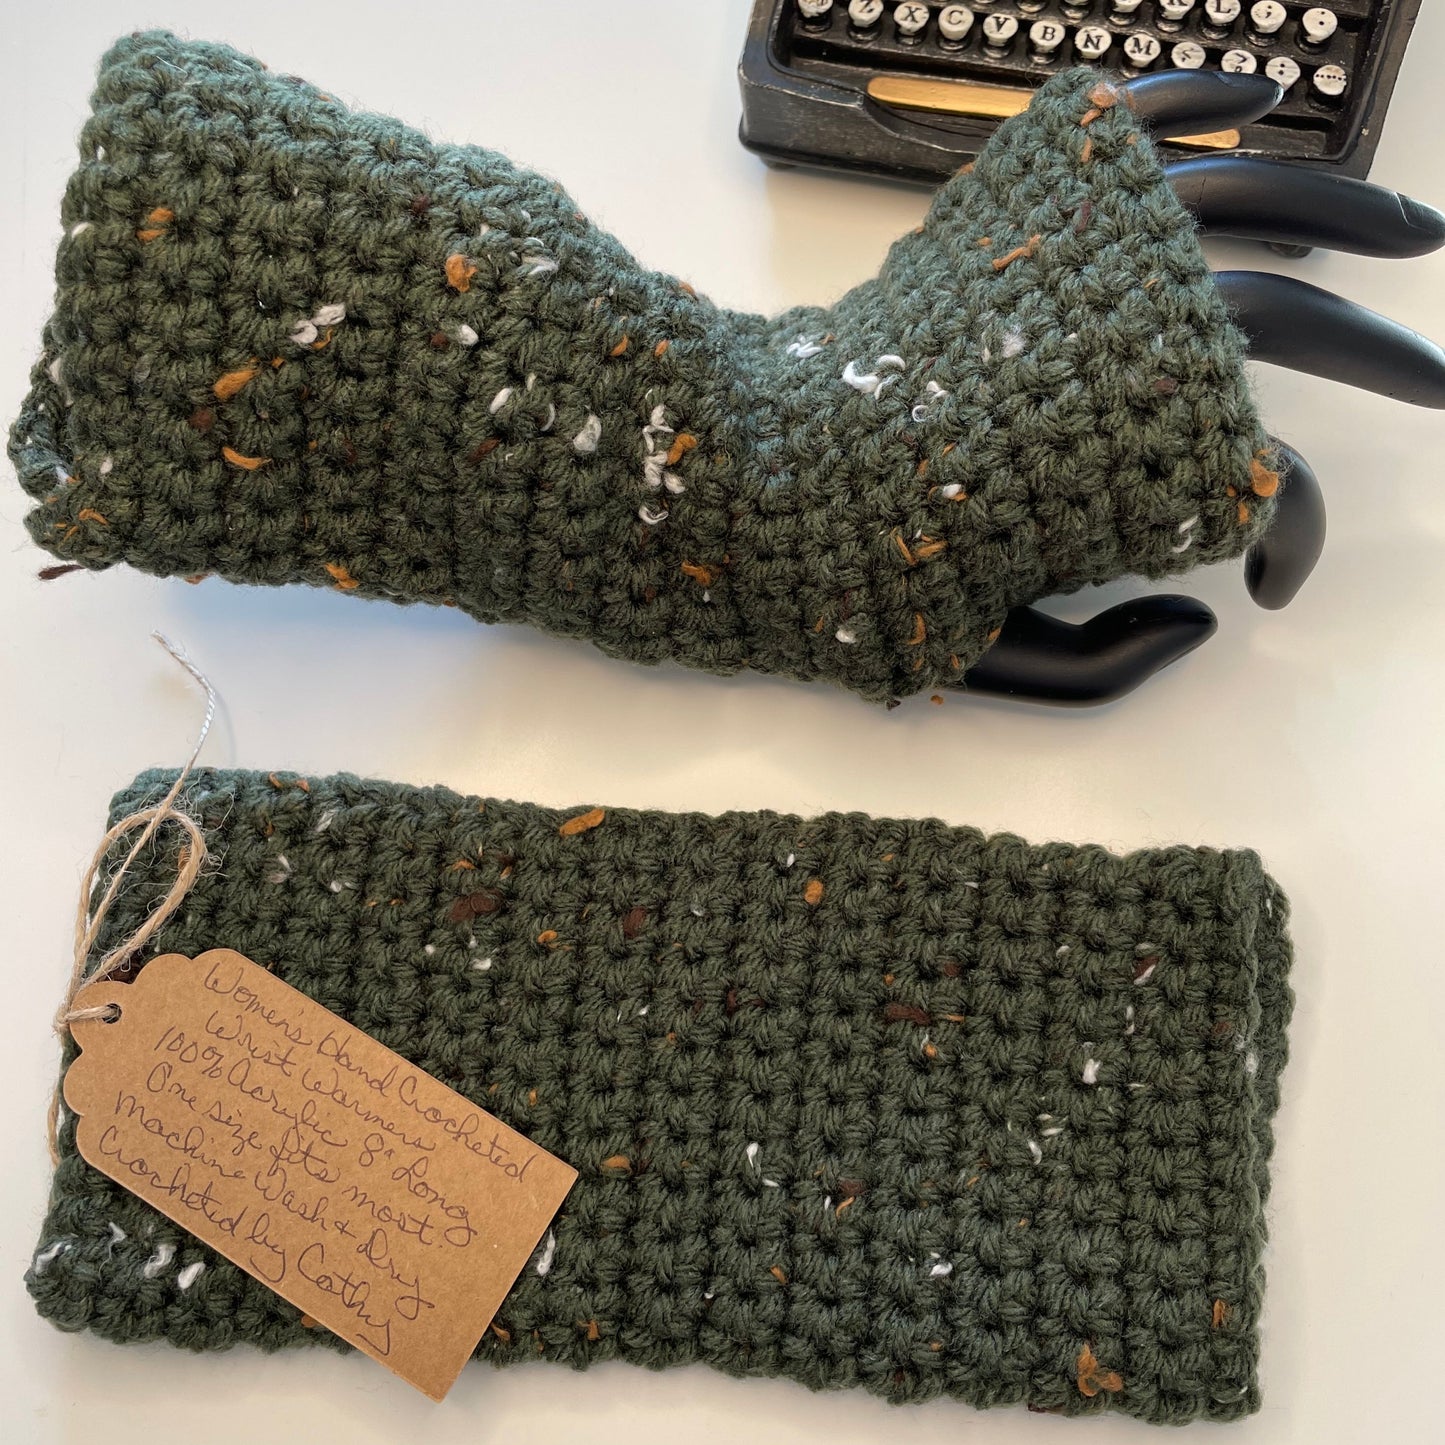 Dark Charcoal Green Tweed Texting Fingerless Gloves Crochet Knit Fall Winter Gaming Tech Wrist Warmers Speckled Army Outdoor displayed 1 flat, one on mannequin hand